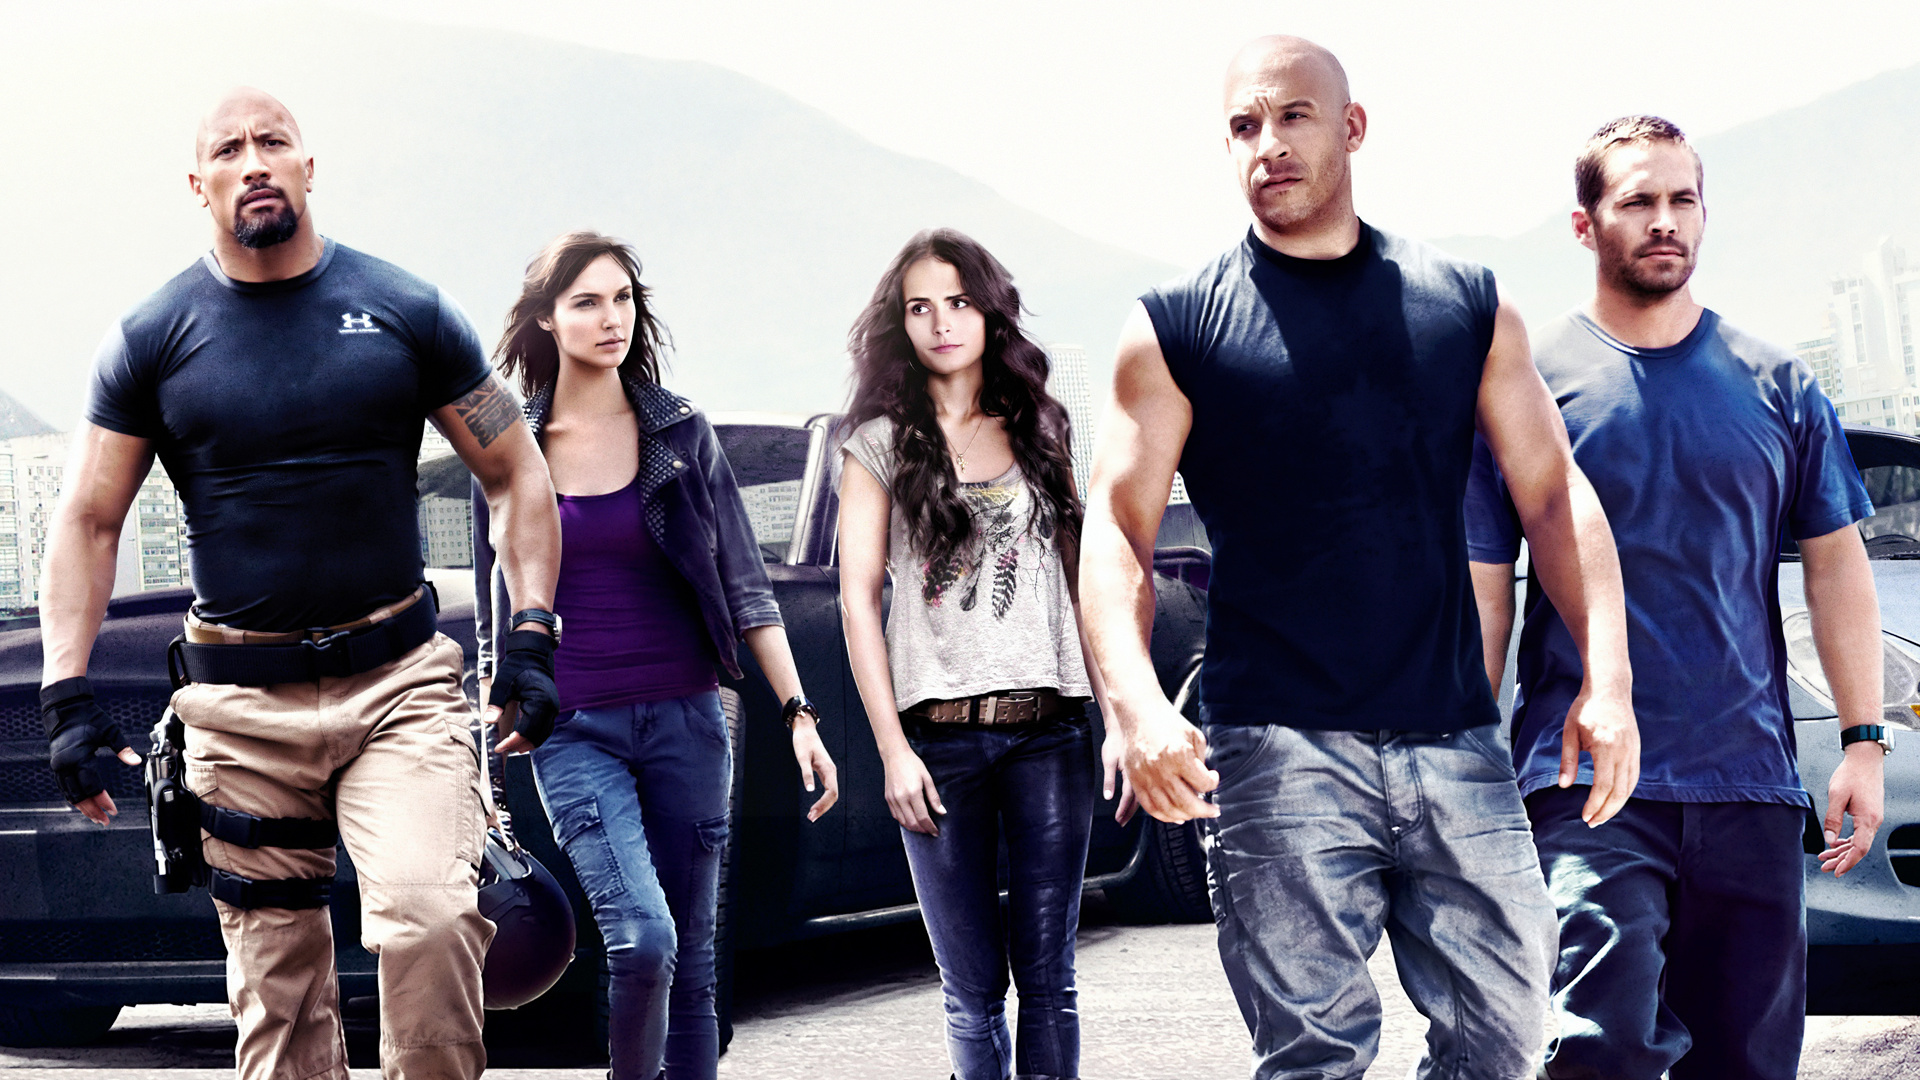 Fast And Furious Wallpaper